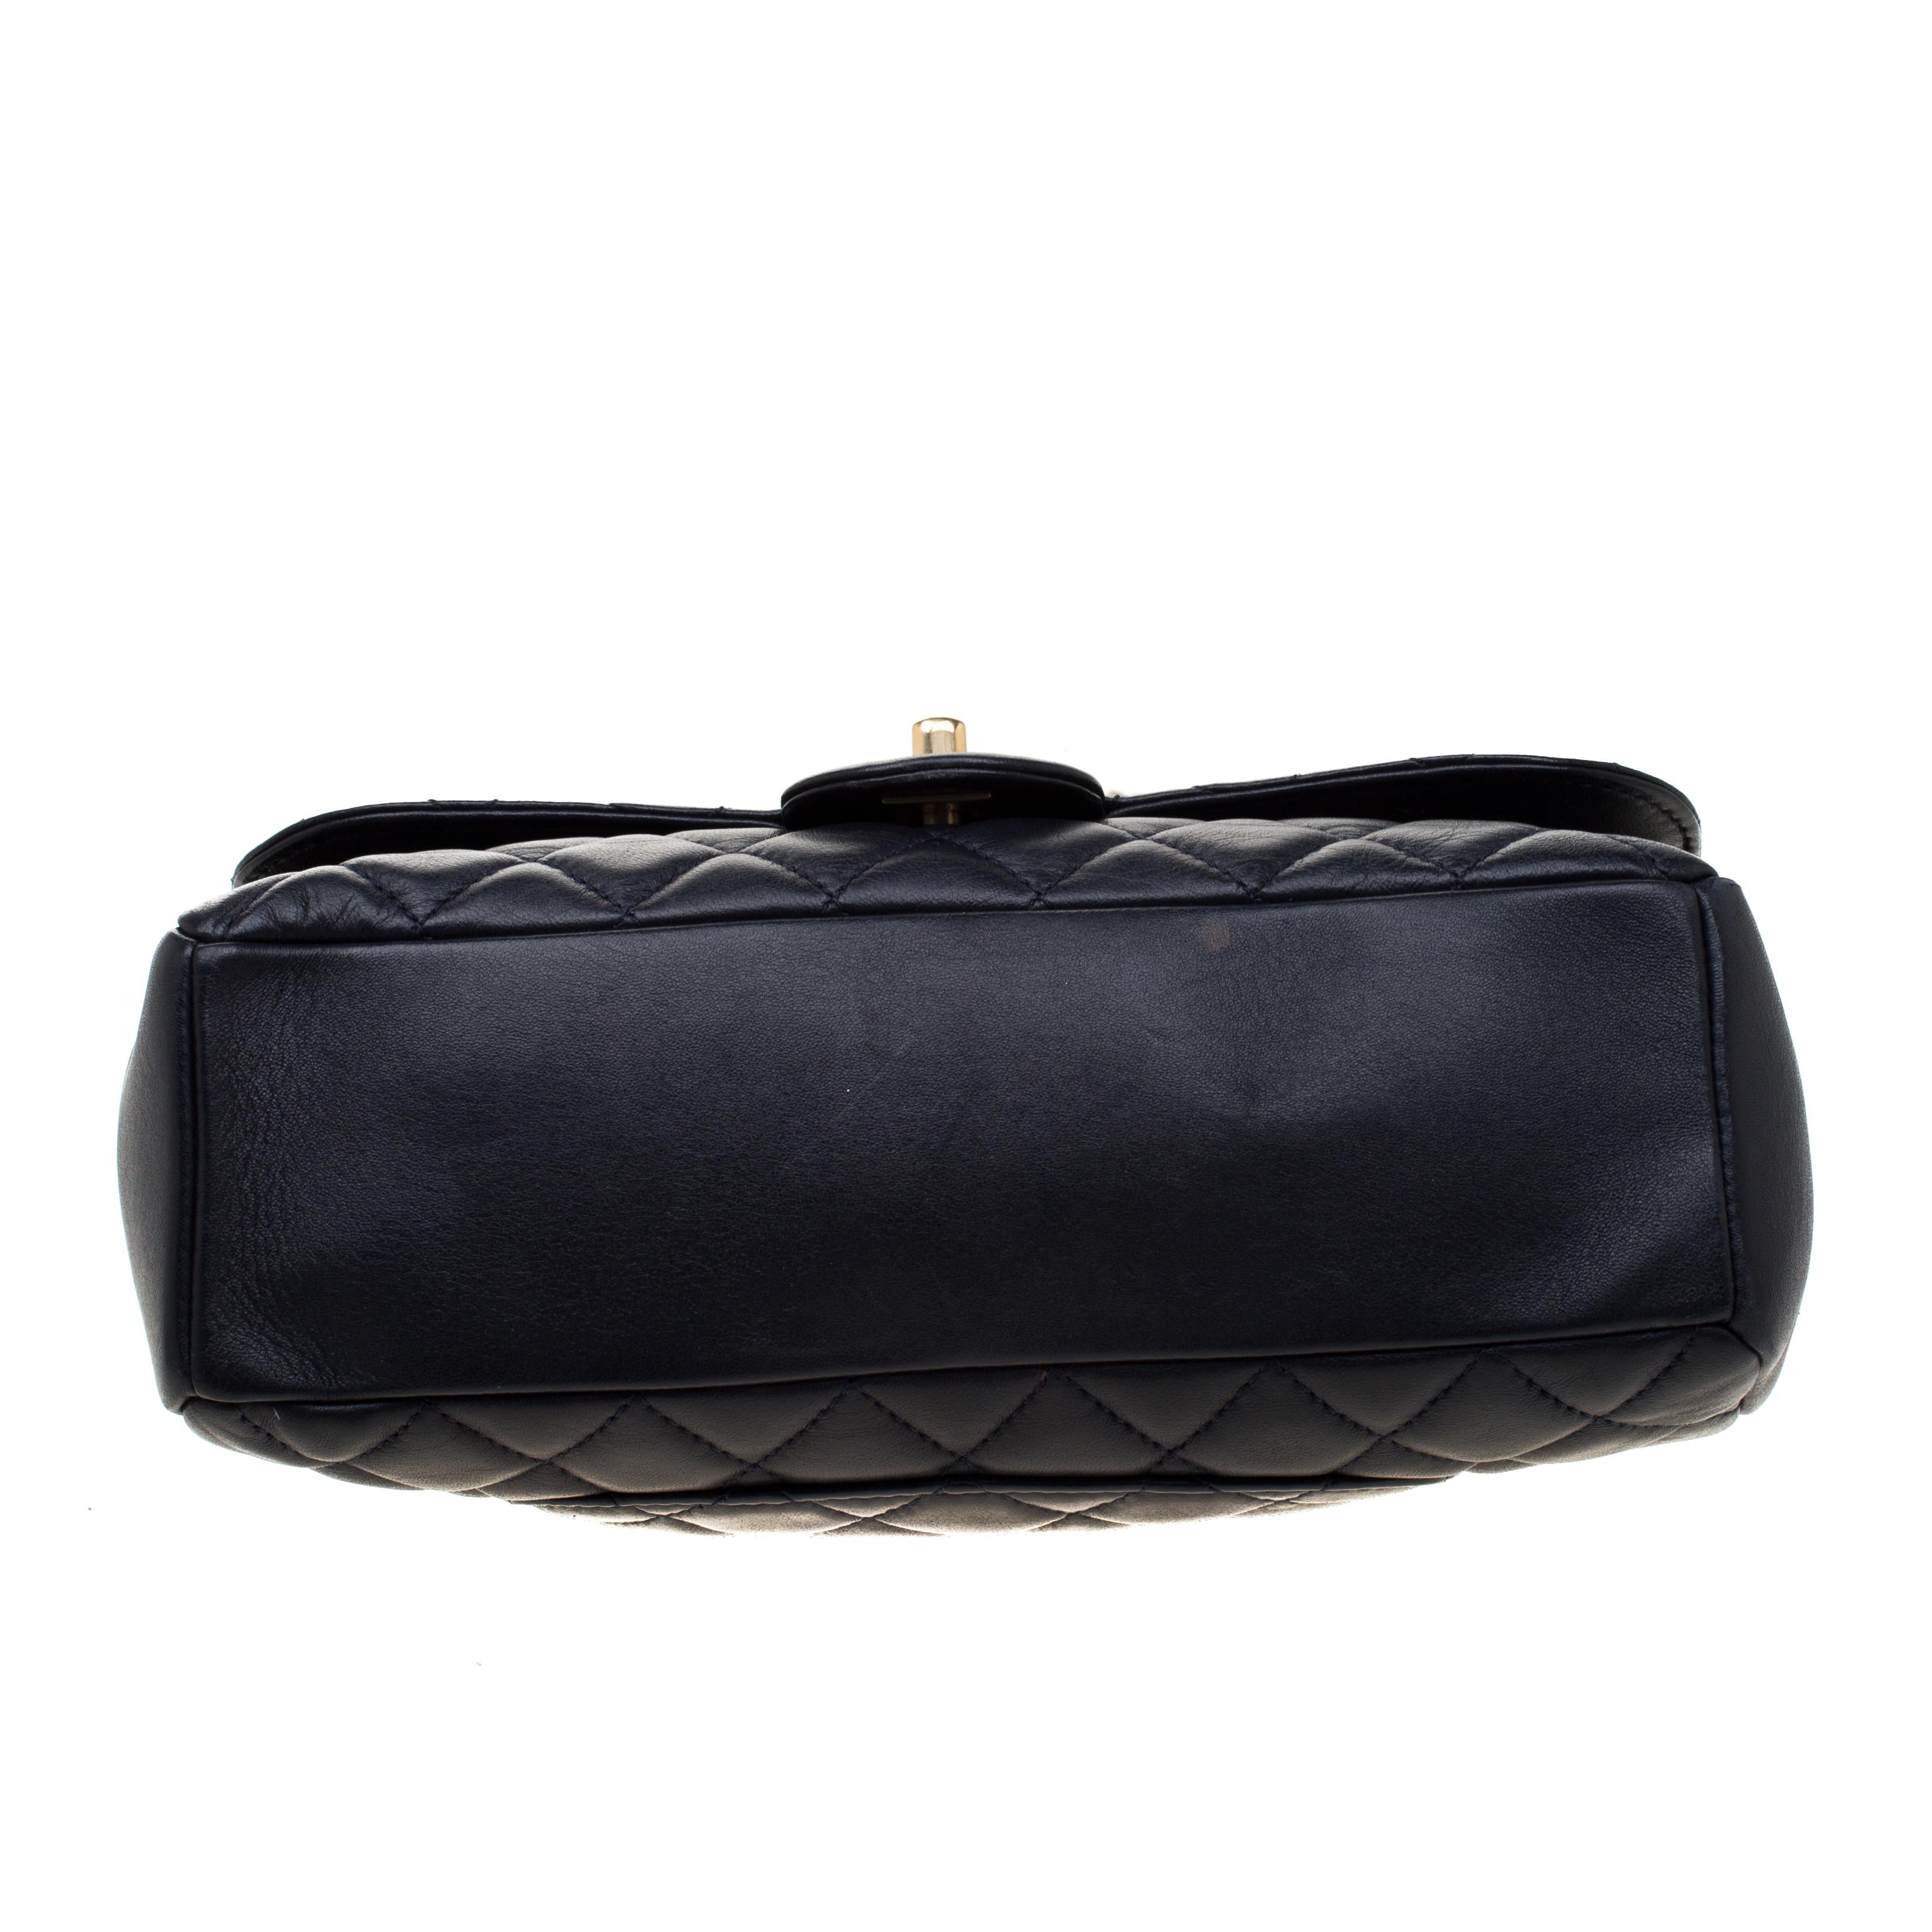 Women's Chanel Navy Blue Quilted Leather Mademoiselle Chic Flap Shoulder Bag